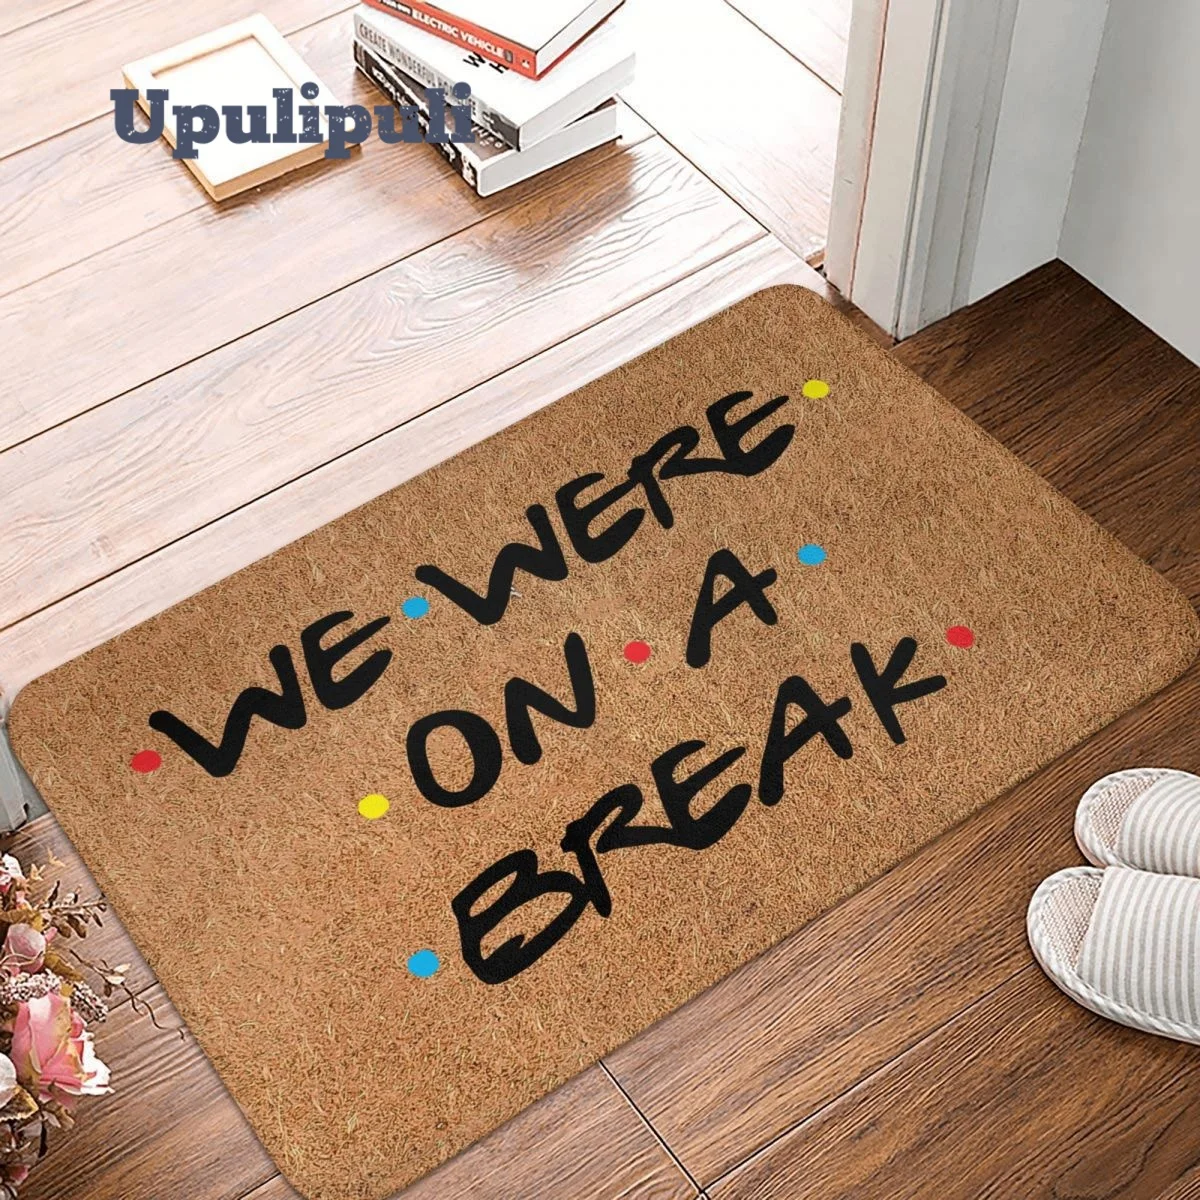 We Were On A Break Doormat Soft Rug Anti-Slip Friends Tv Show Series Absorbent Mat for Living Room Kitchen Washable Balcony Mats